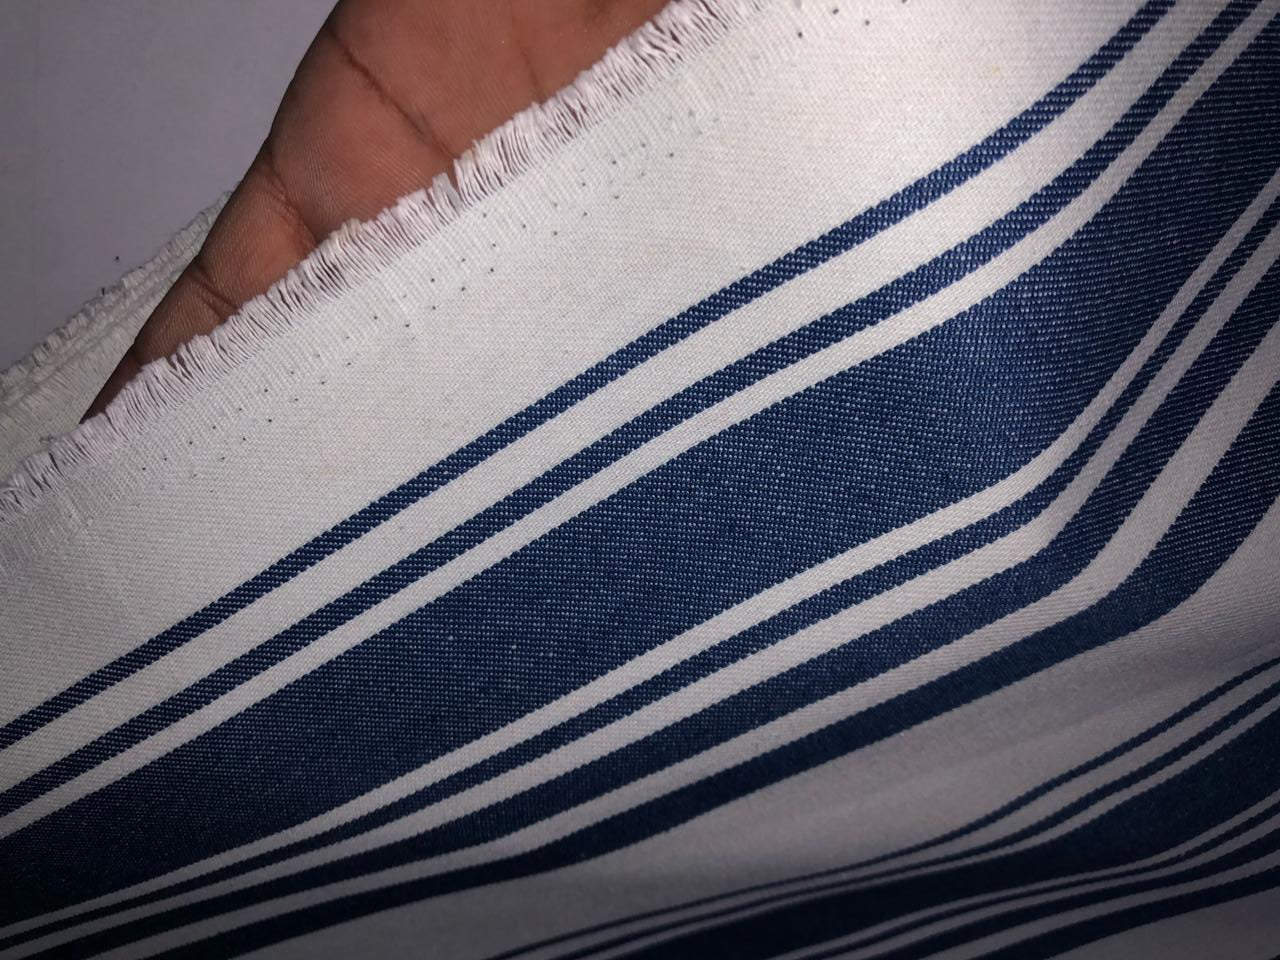 100% Cotton Denim Fabric 58" wide available in 4  different stripe designs 2 navy and white stripes and 2 navy and cream stripe